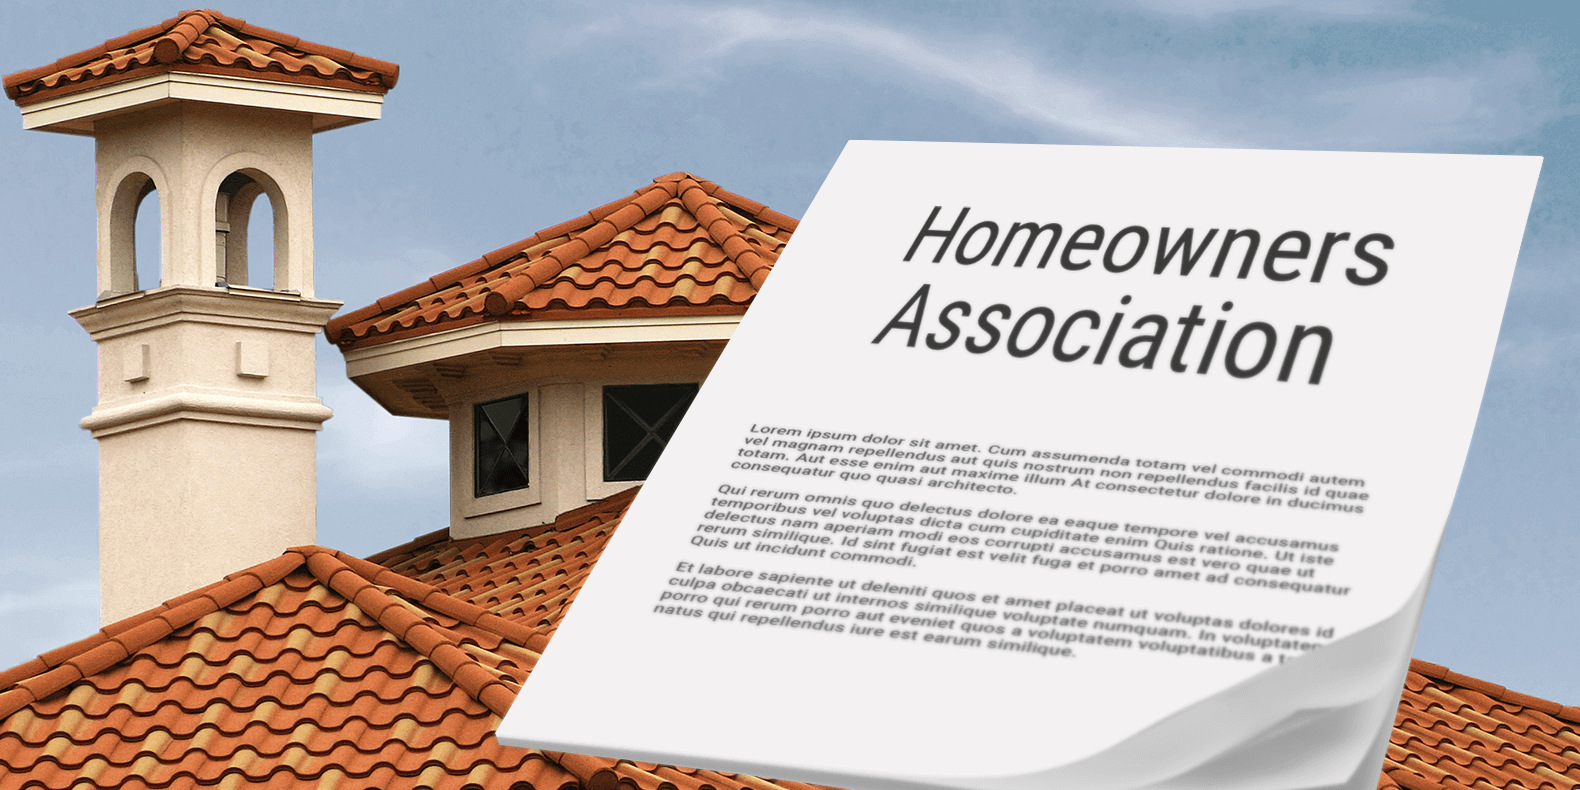 Metal Roofing and HOAs: What Homeowners Need to Know